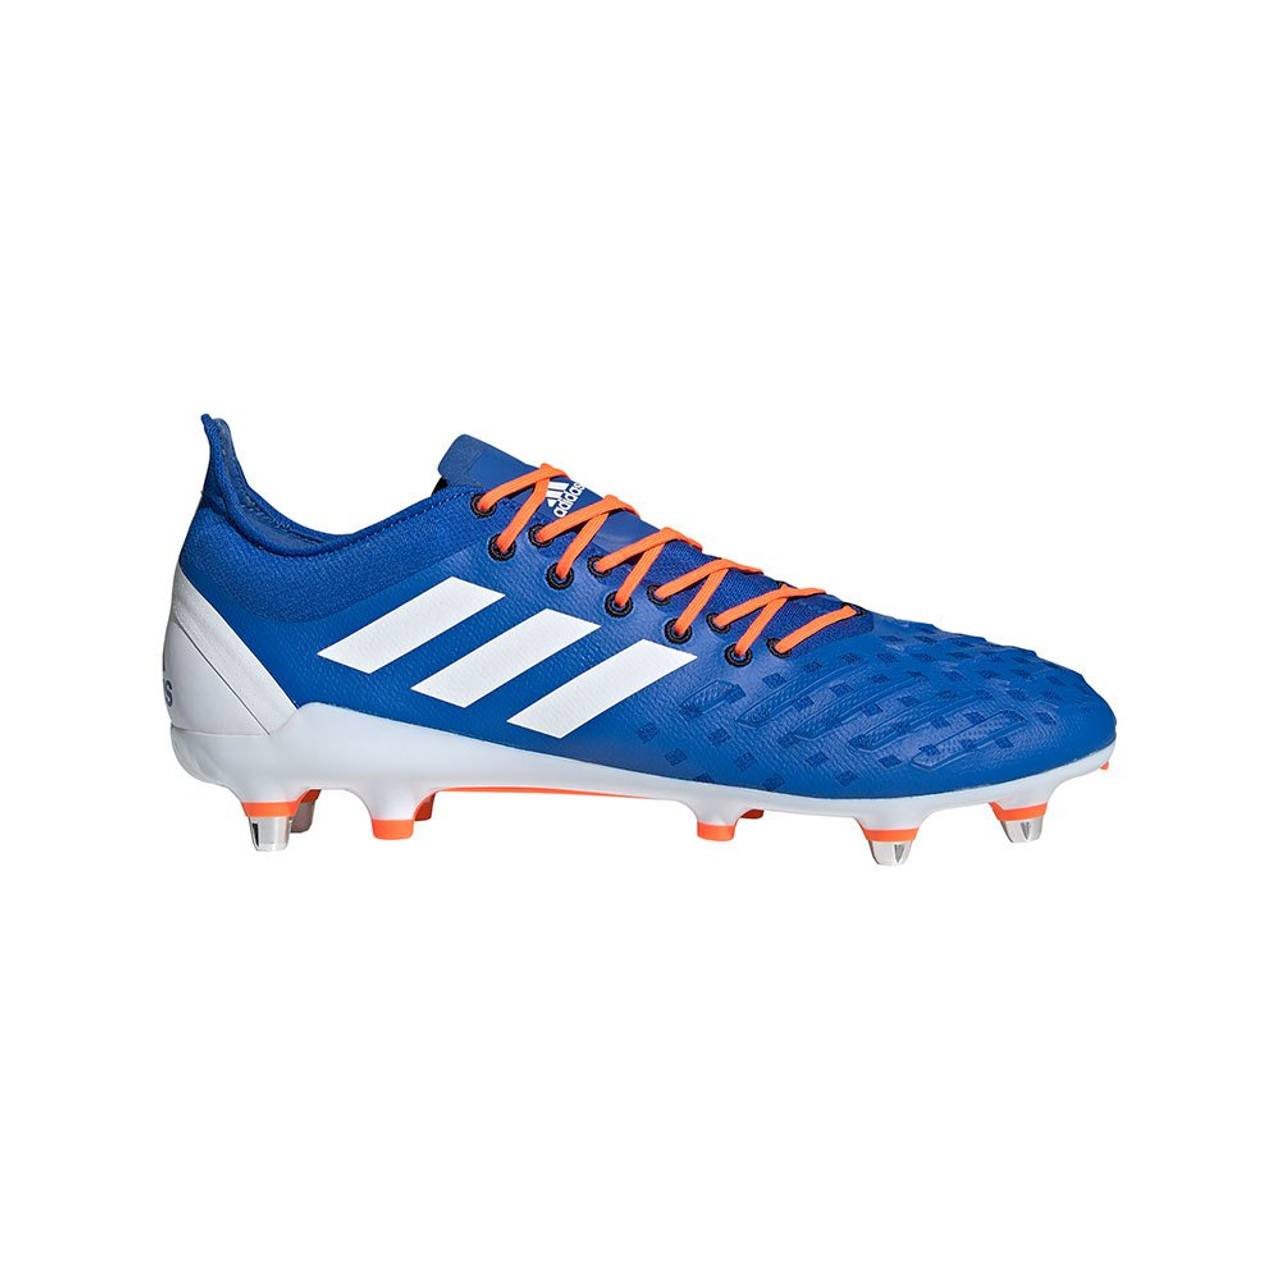 adidas Predator XP SG Rugby Cleat - Blue on sale at Rugby City | 169.99